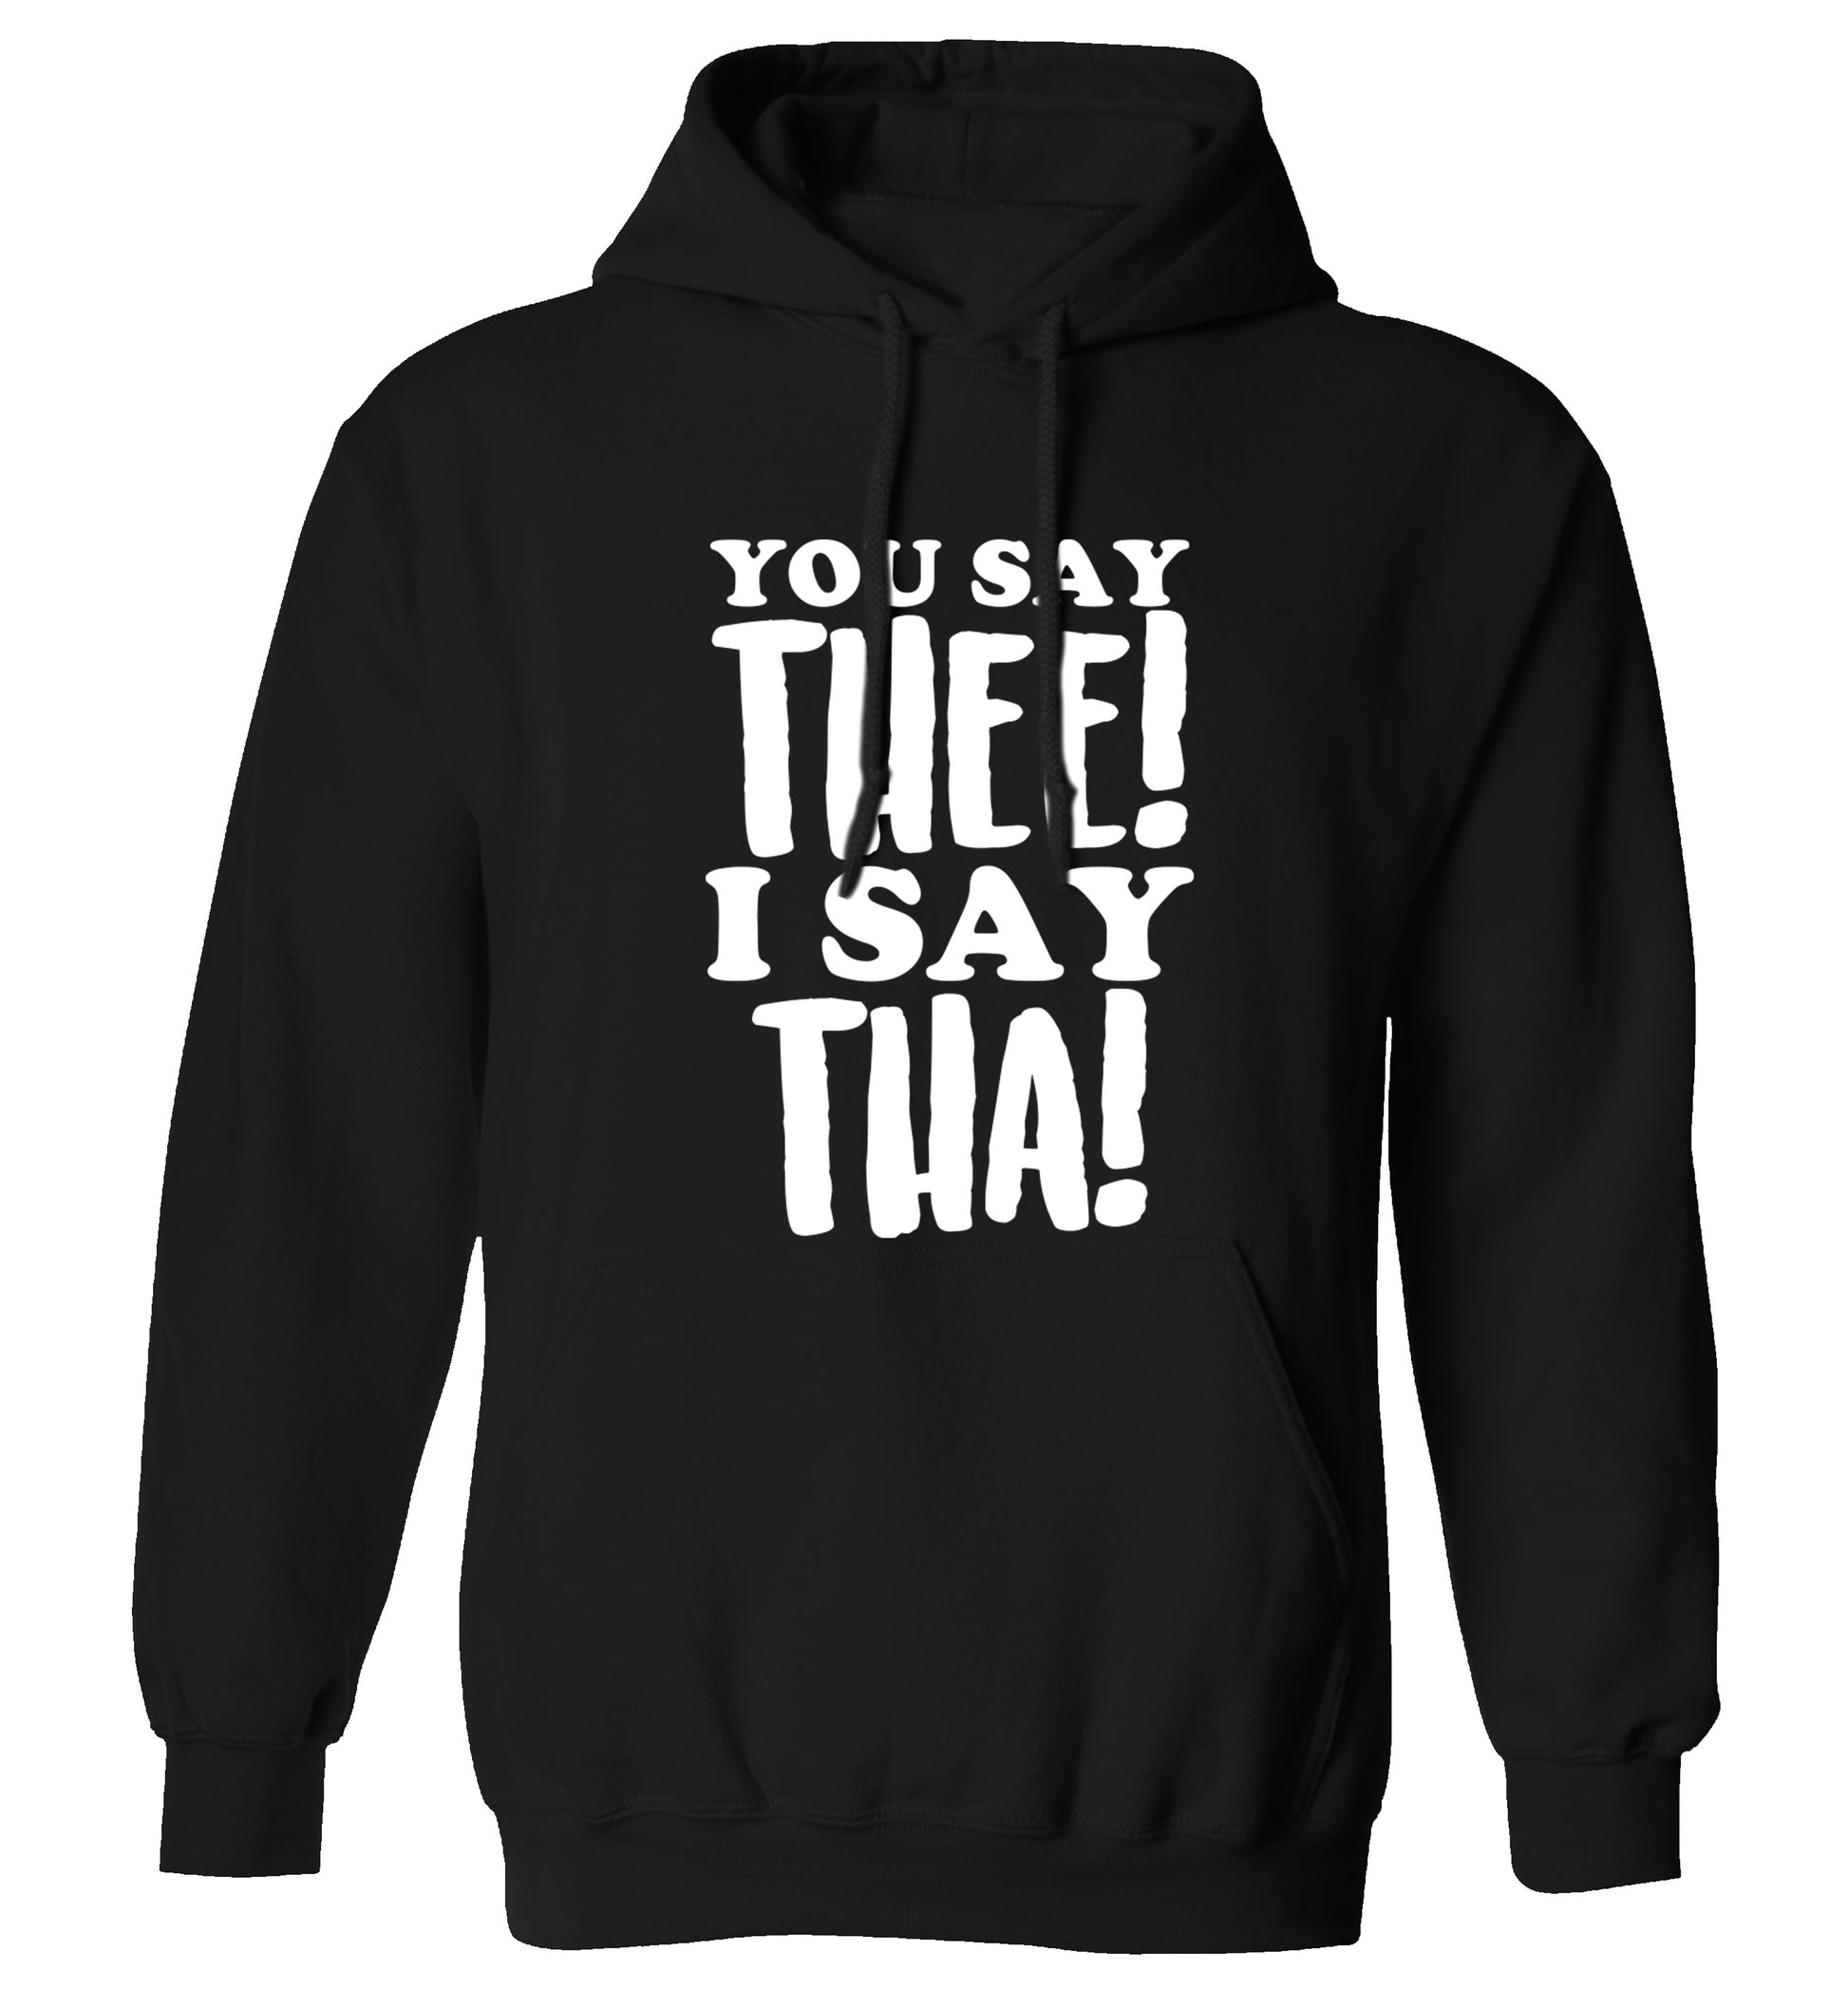 You say thee I say tha adults unisex black hoodie 2XL